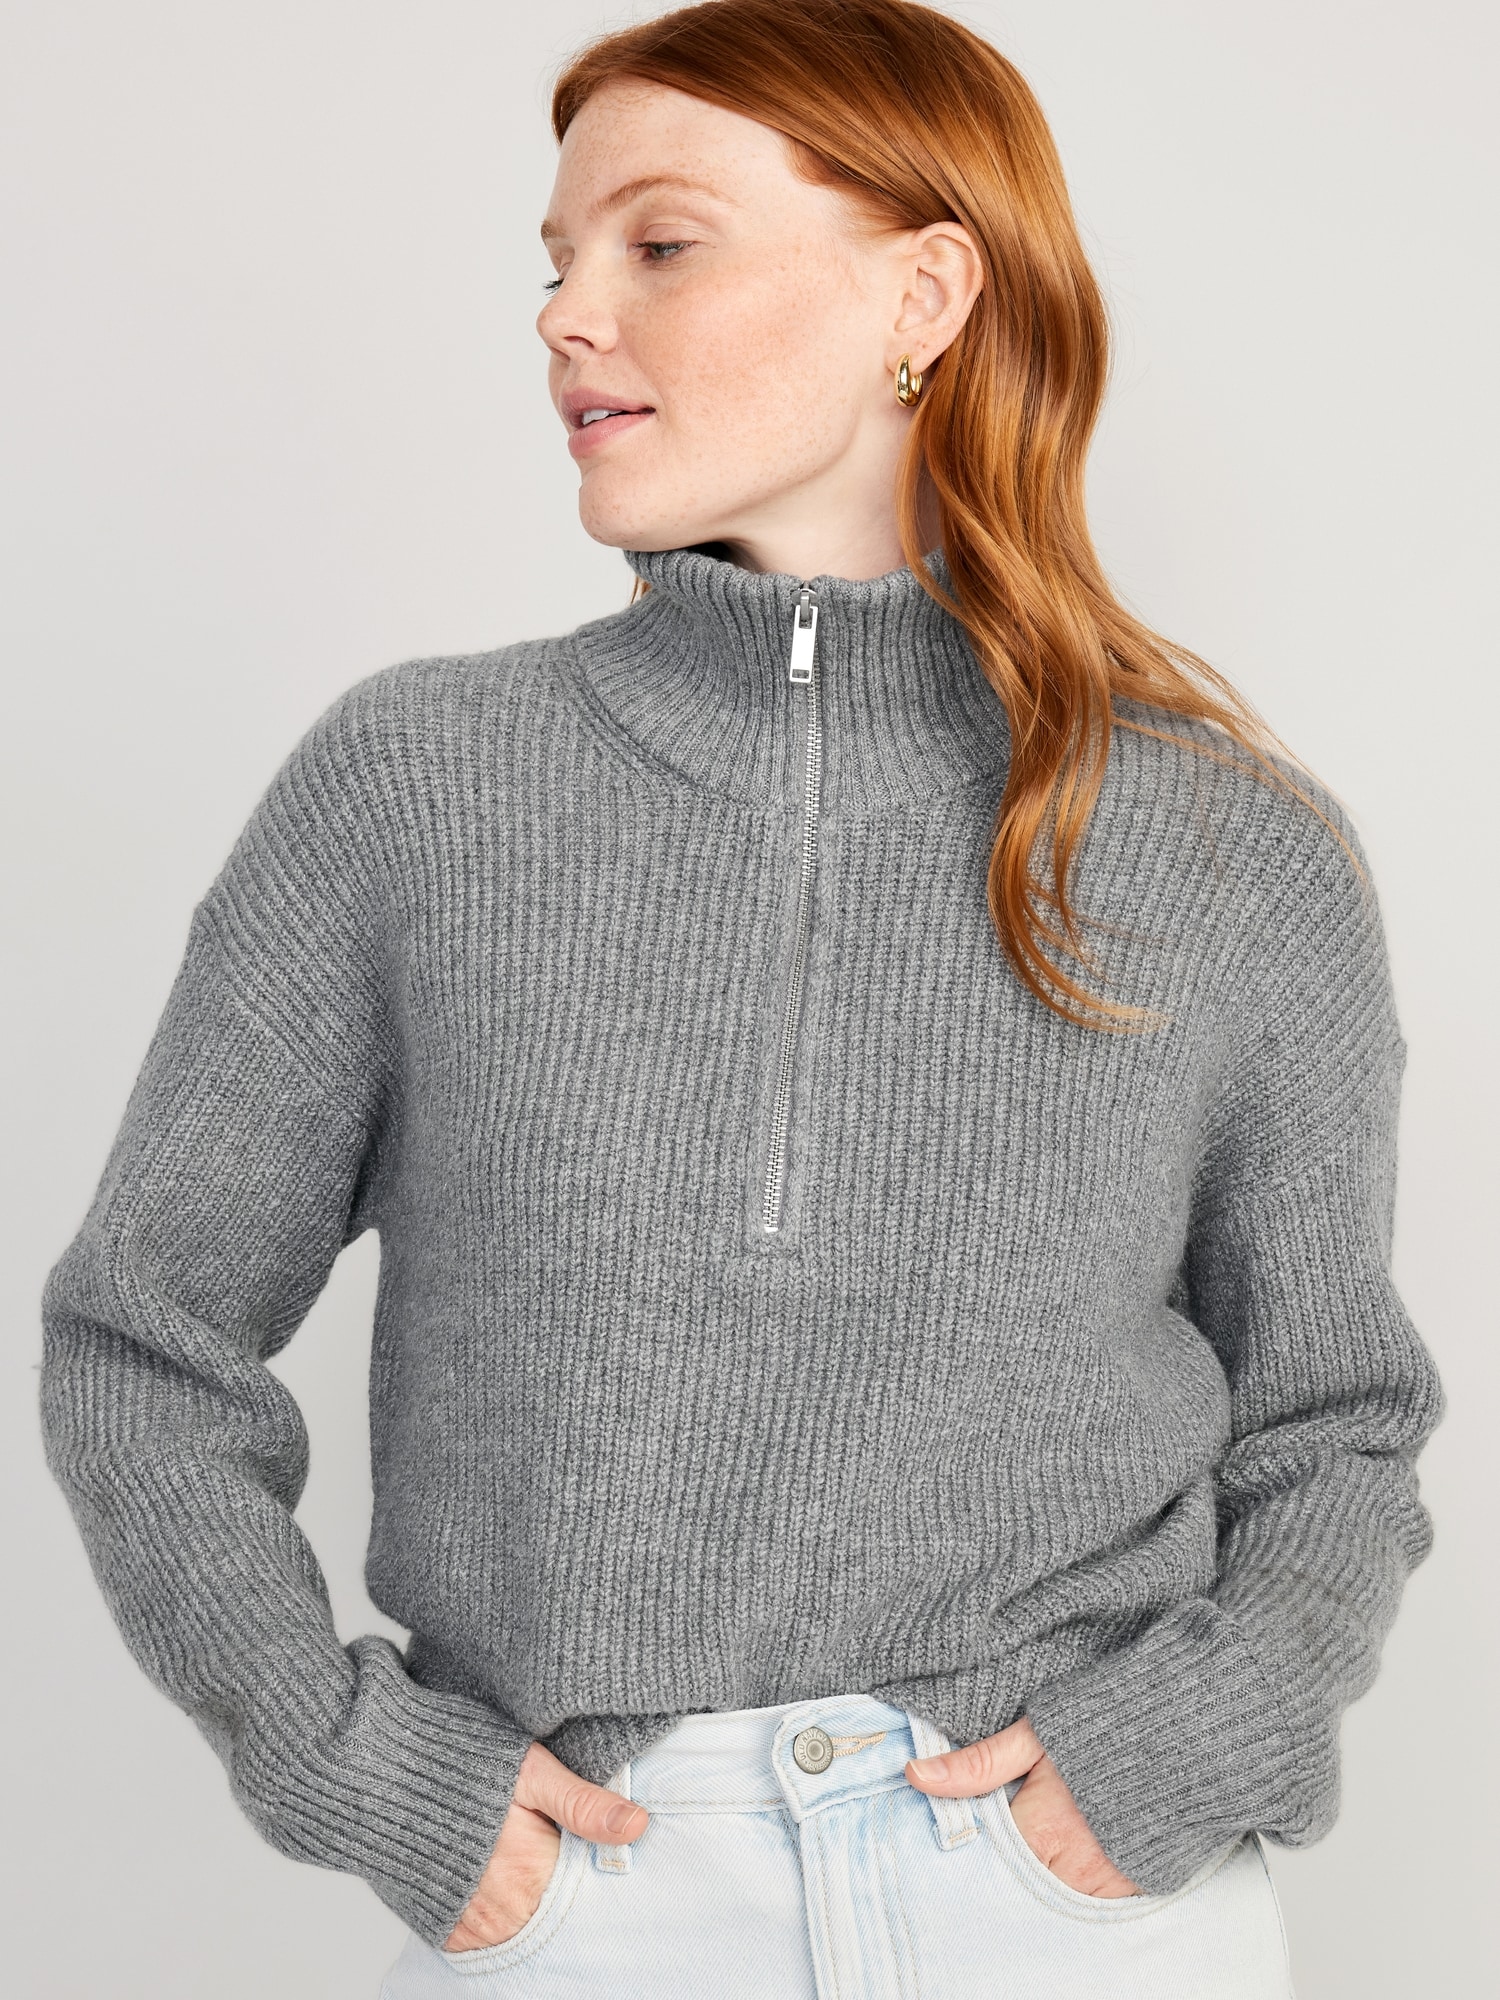 Old Navy - Shaker-Stitch Long-Line Open-Front Sweater for Women gray